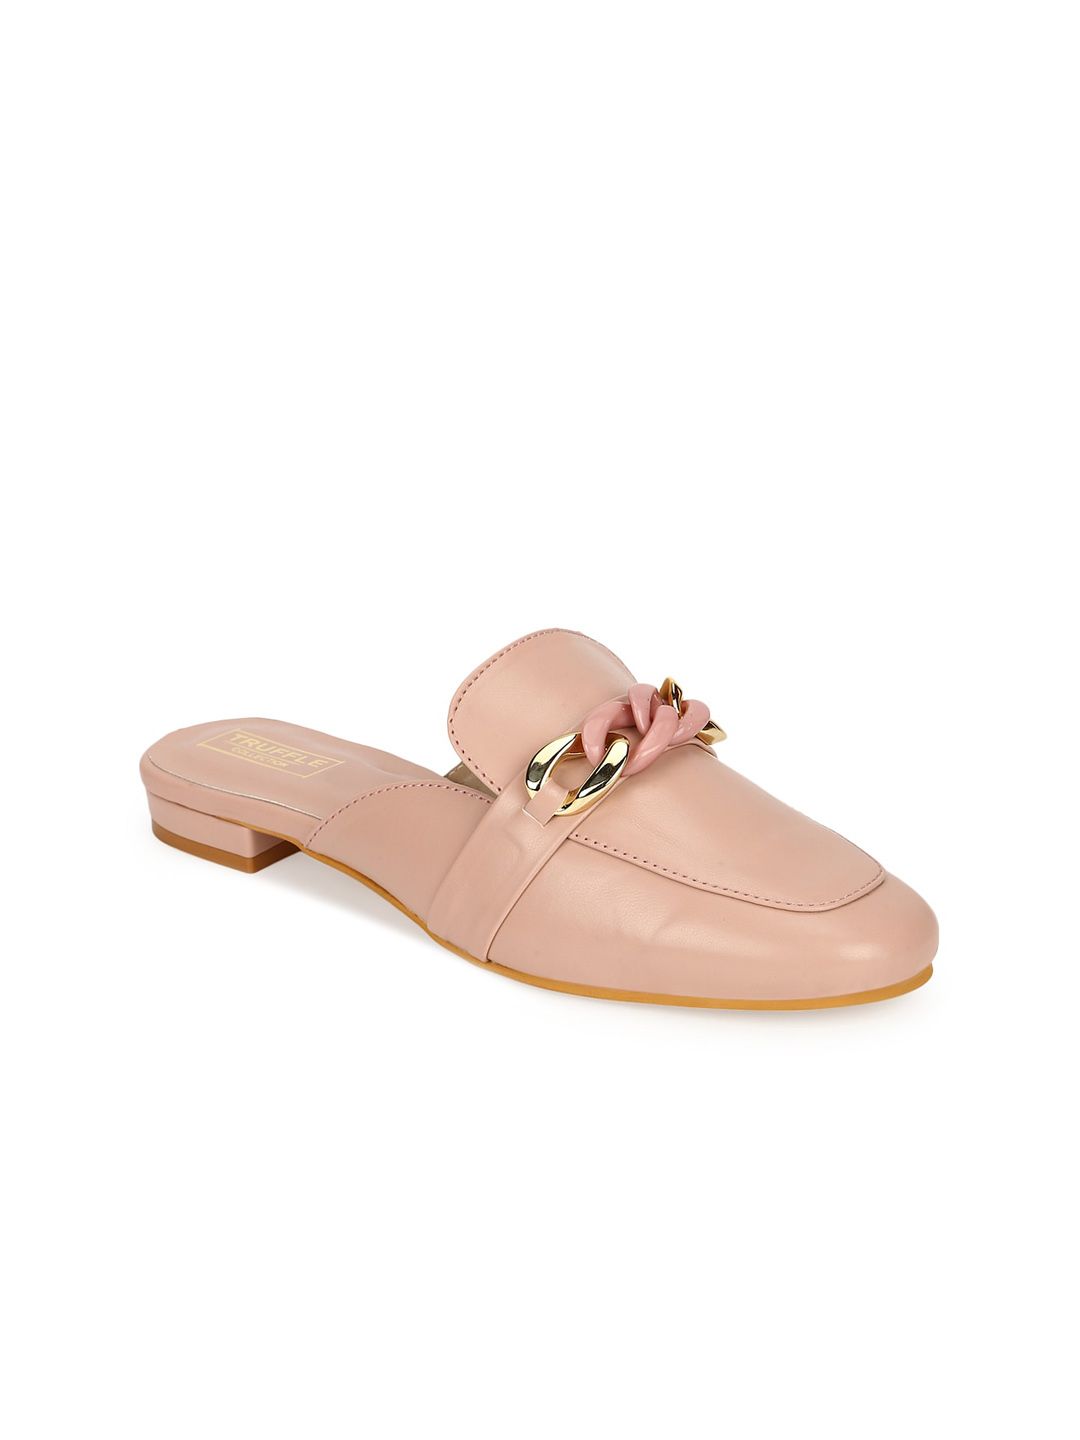 Truffle Collection Women Nude-Coloured PU Loafers Price in India